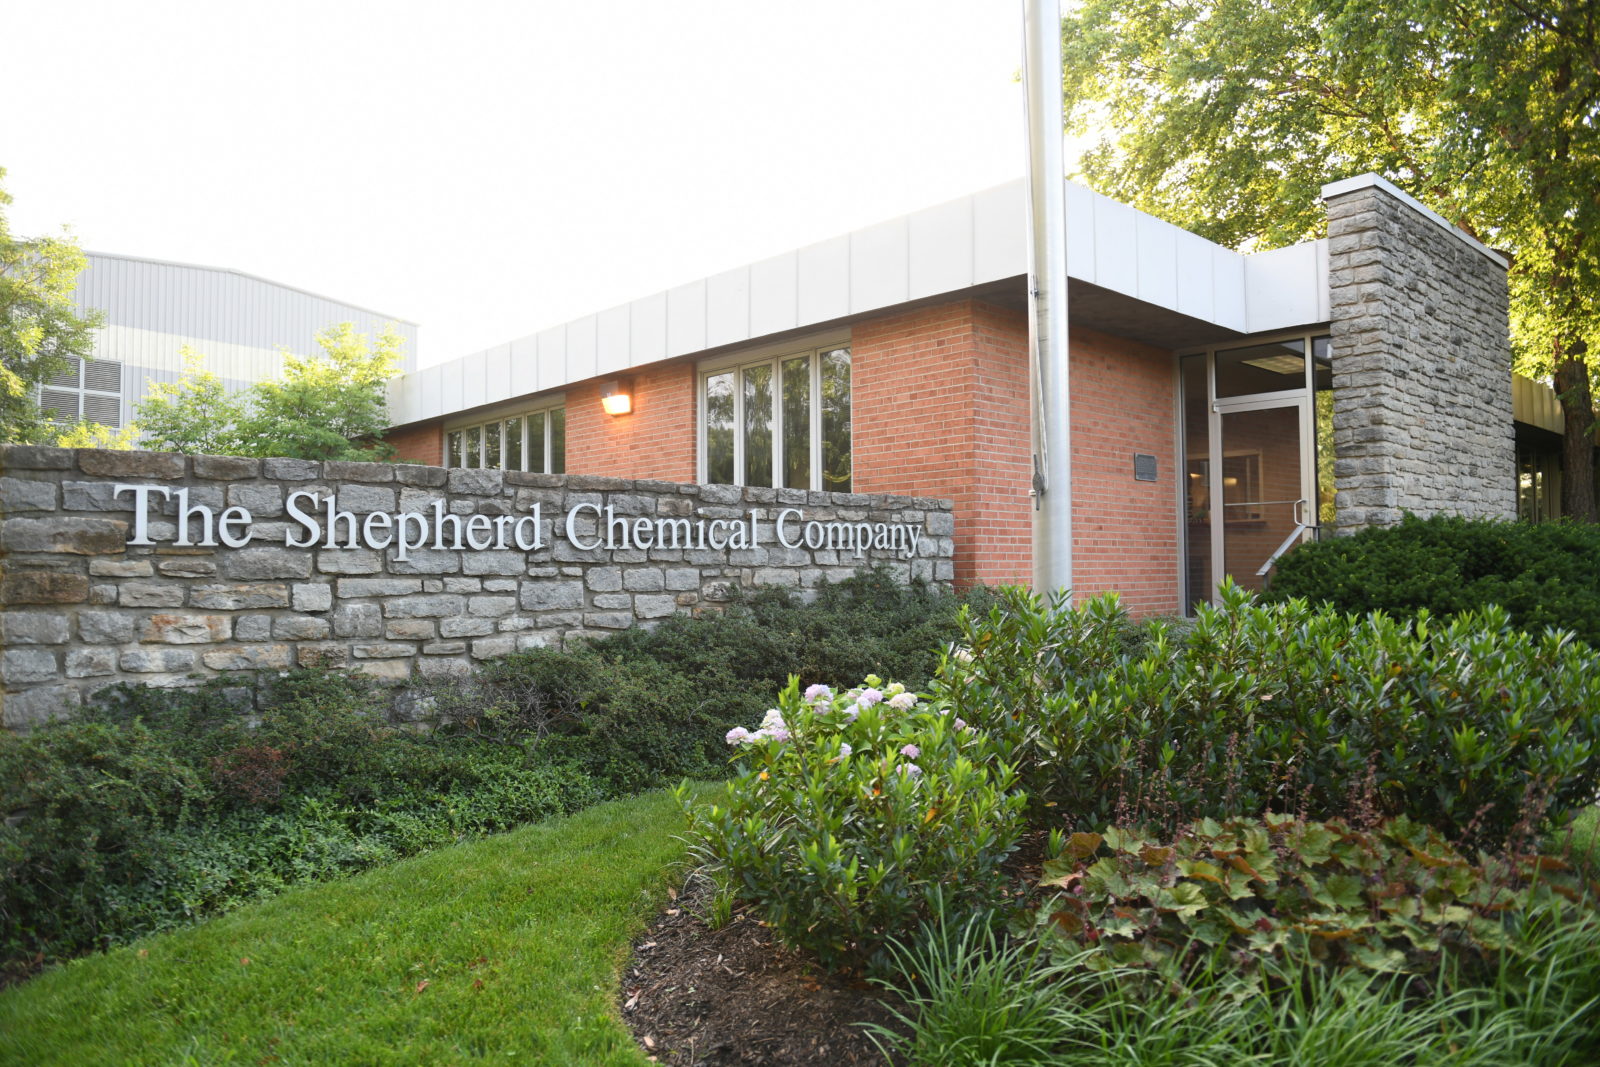 UC Students Visit the Shepherd Chemical Company